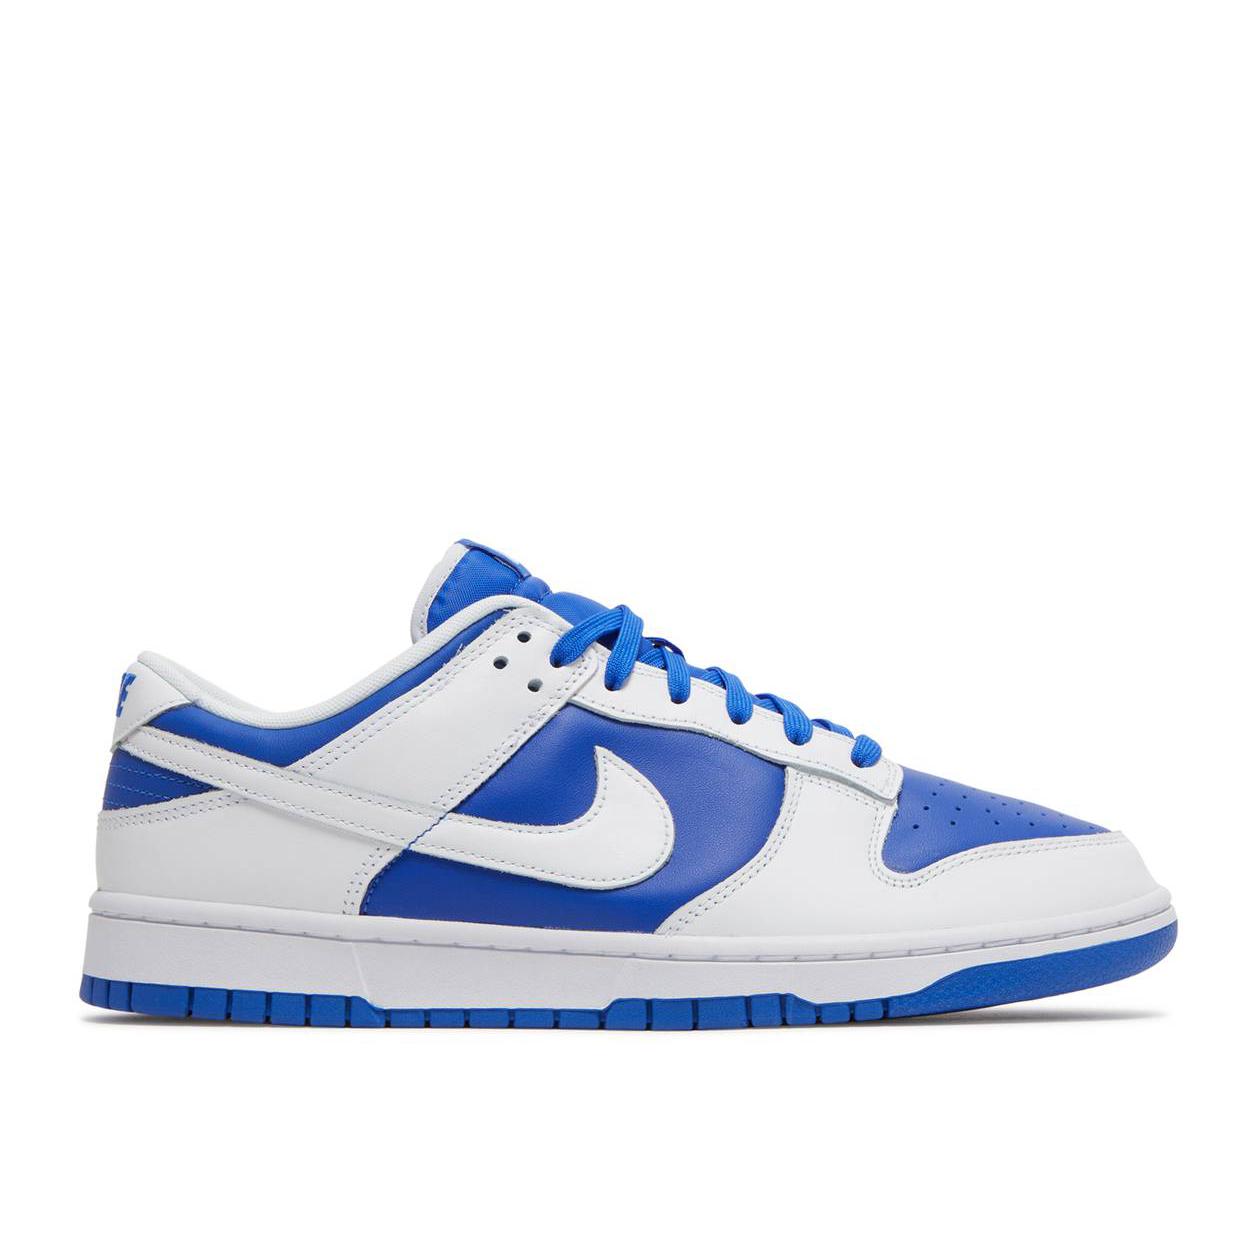 Nike Dunk Low Retro - Racer Blue - Used